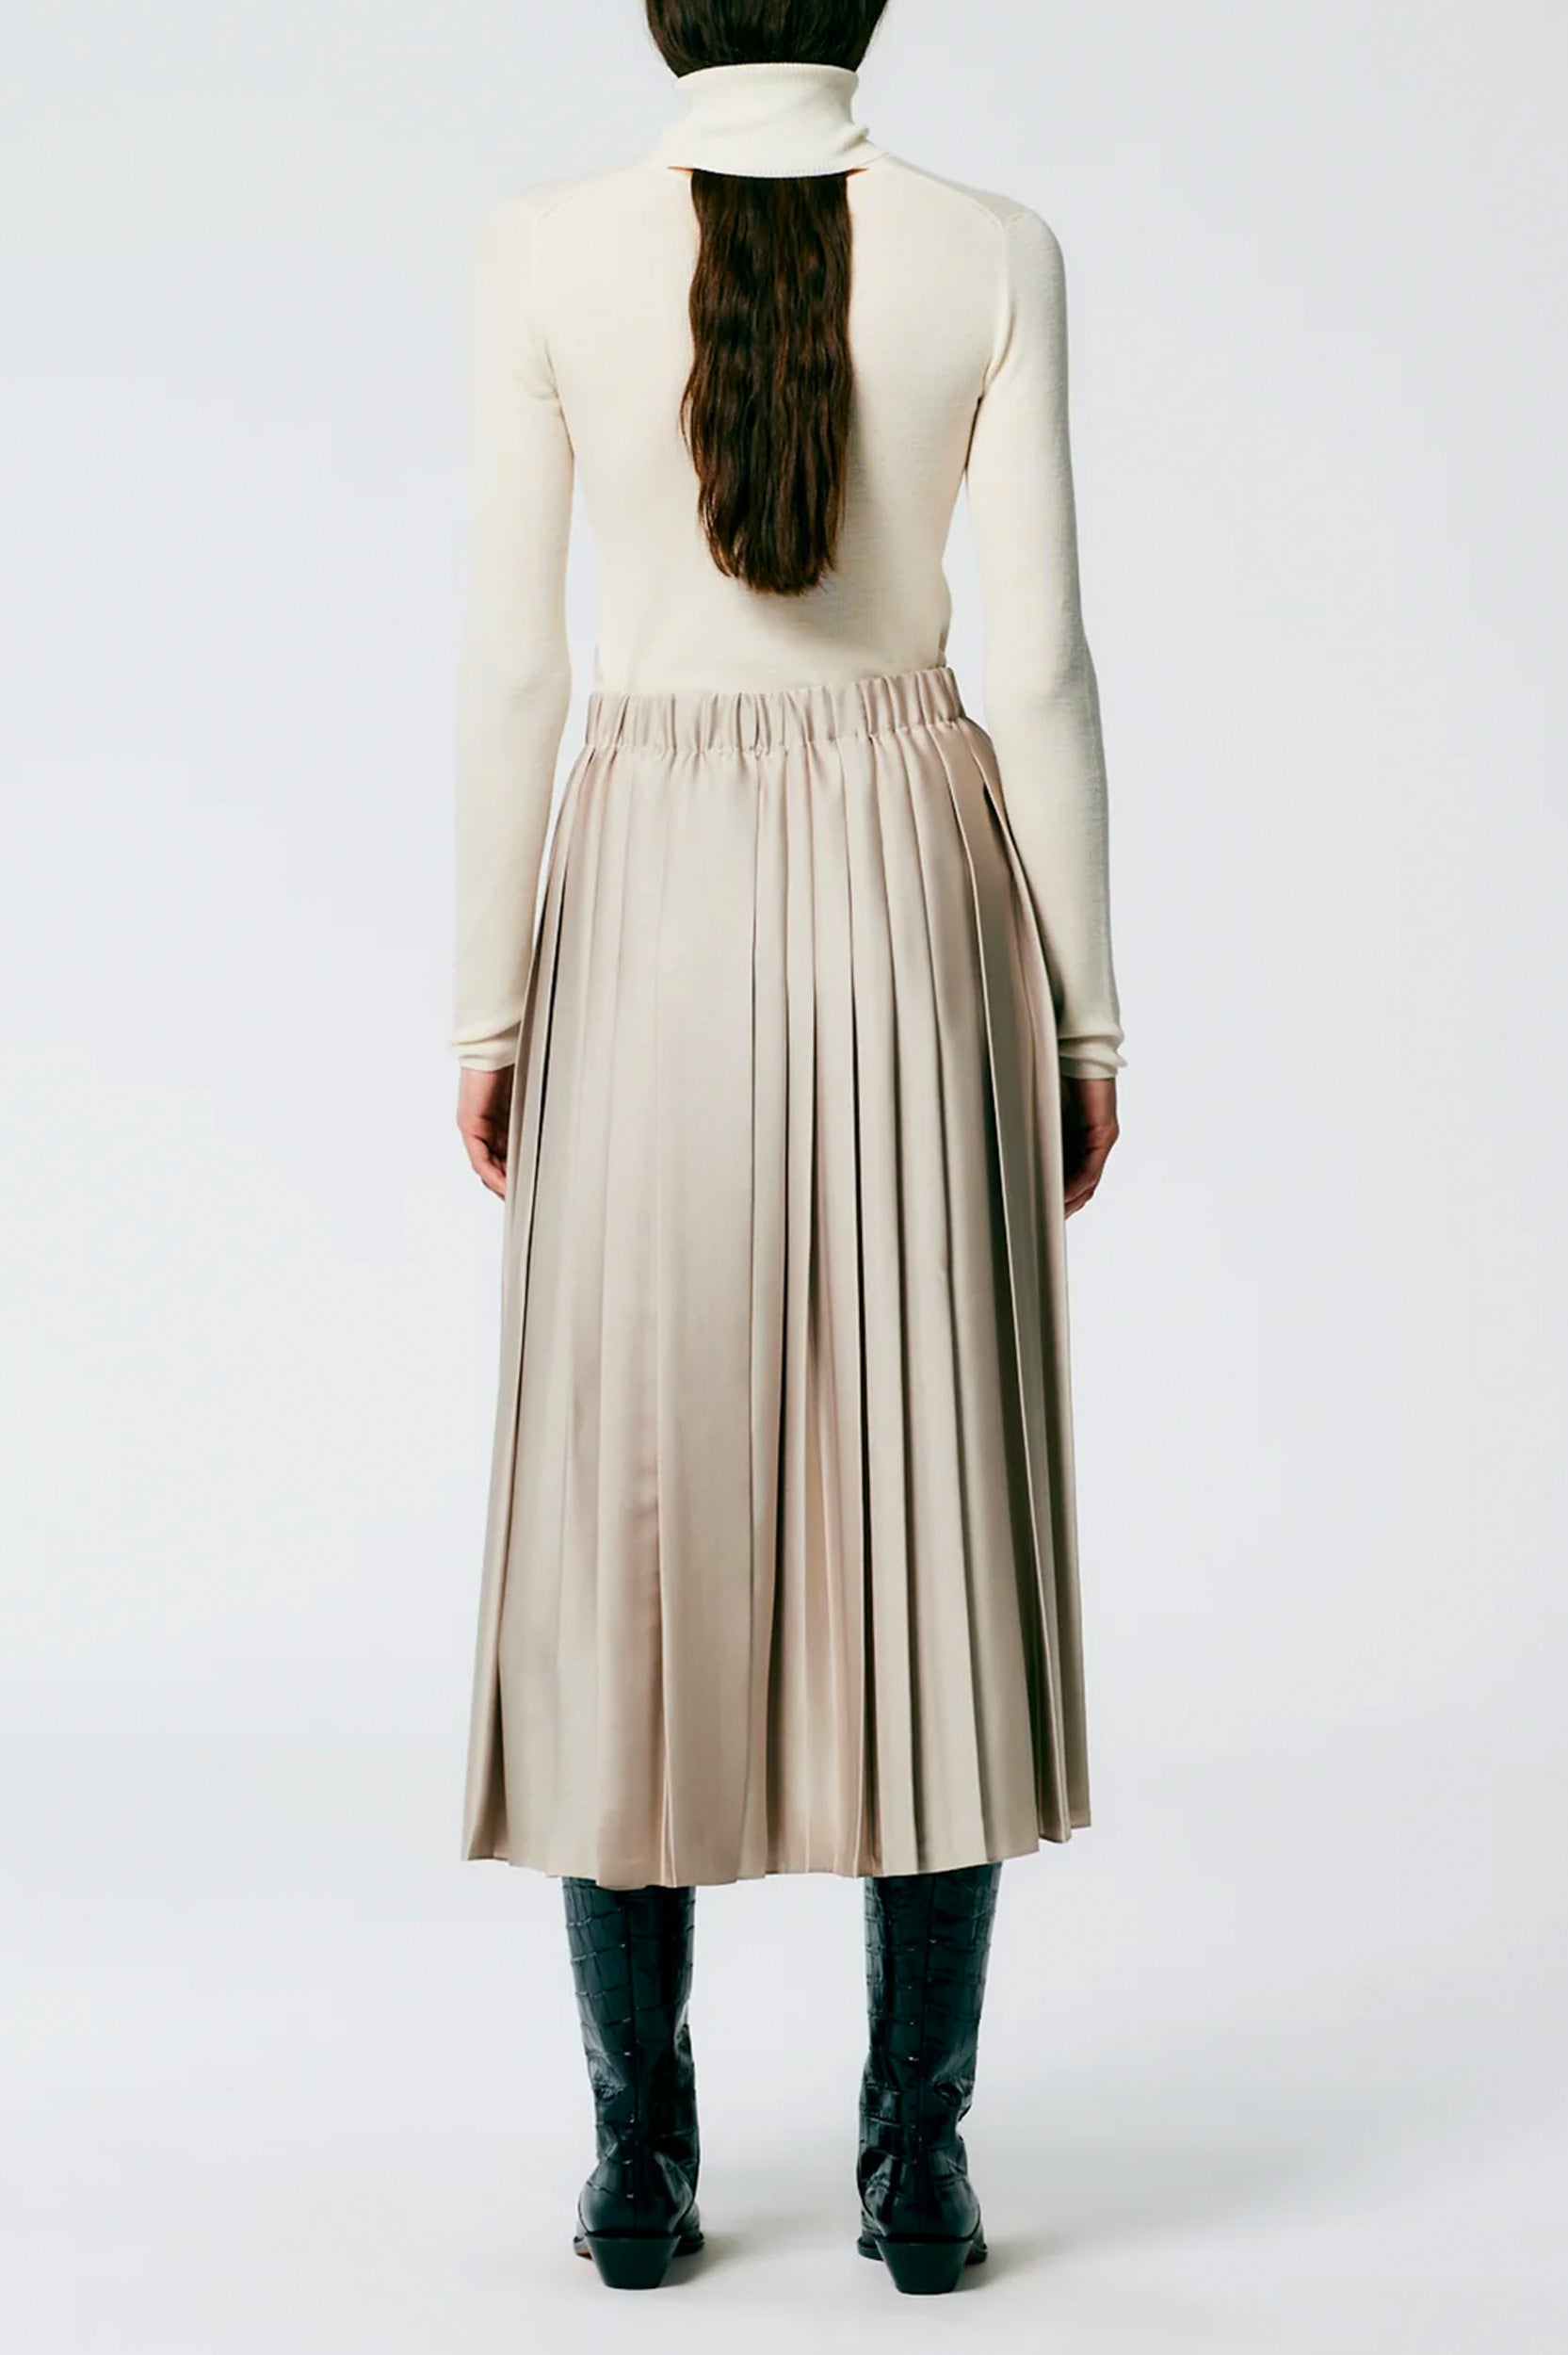 Feather Weight Pleated Skirt in Light Tan